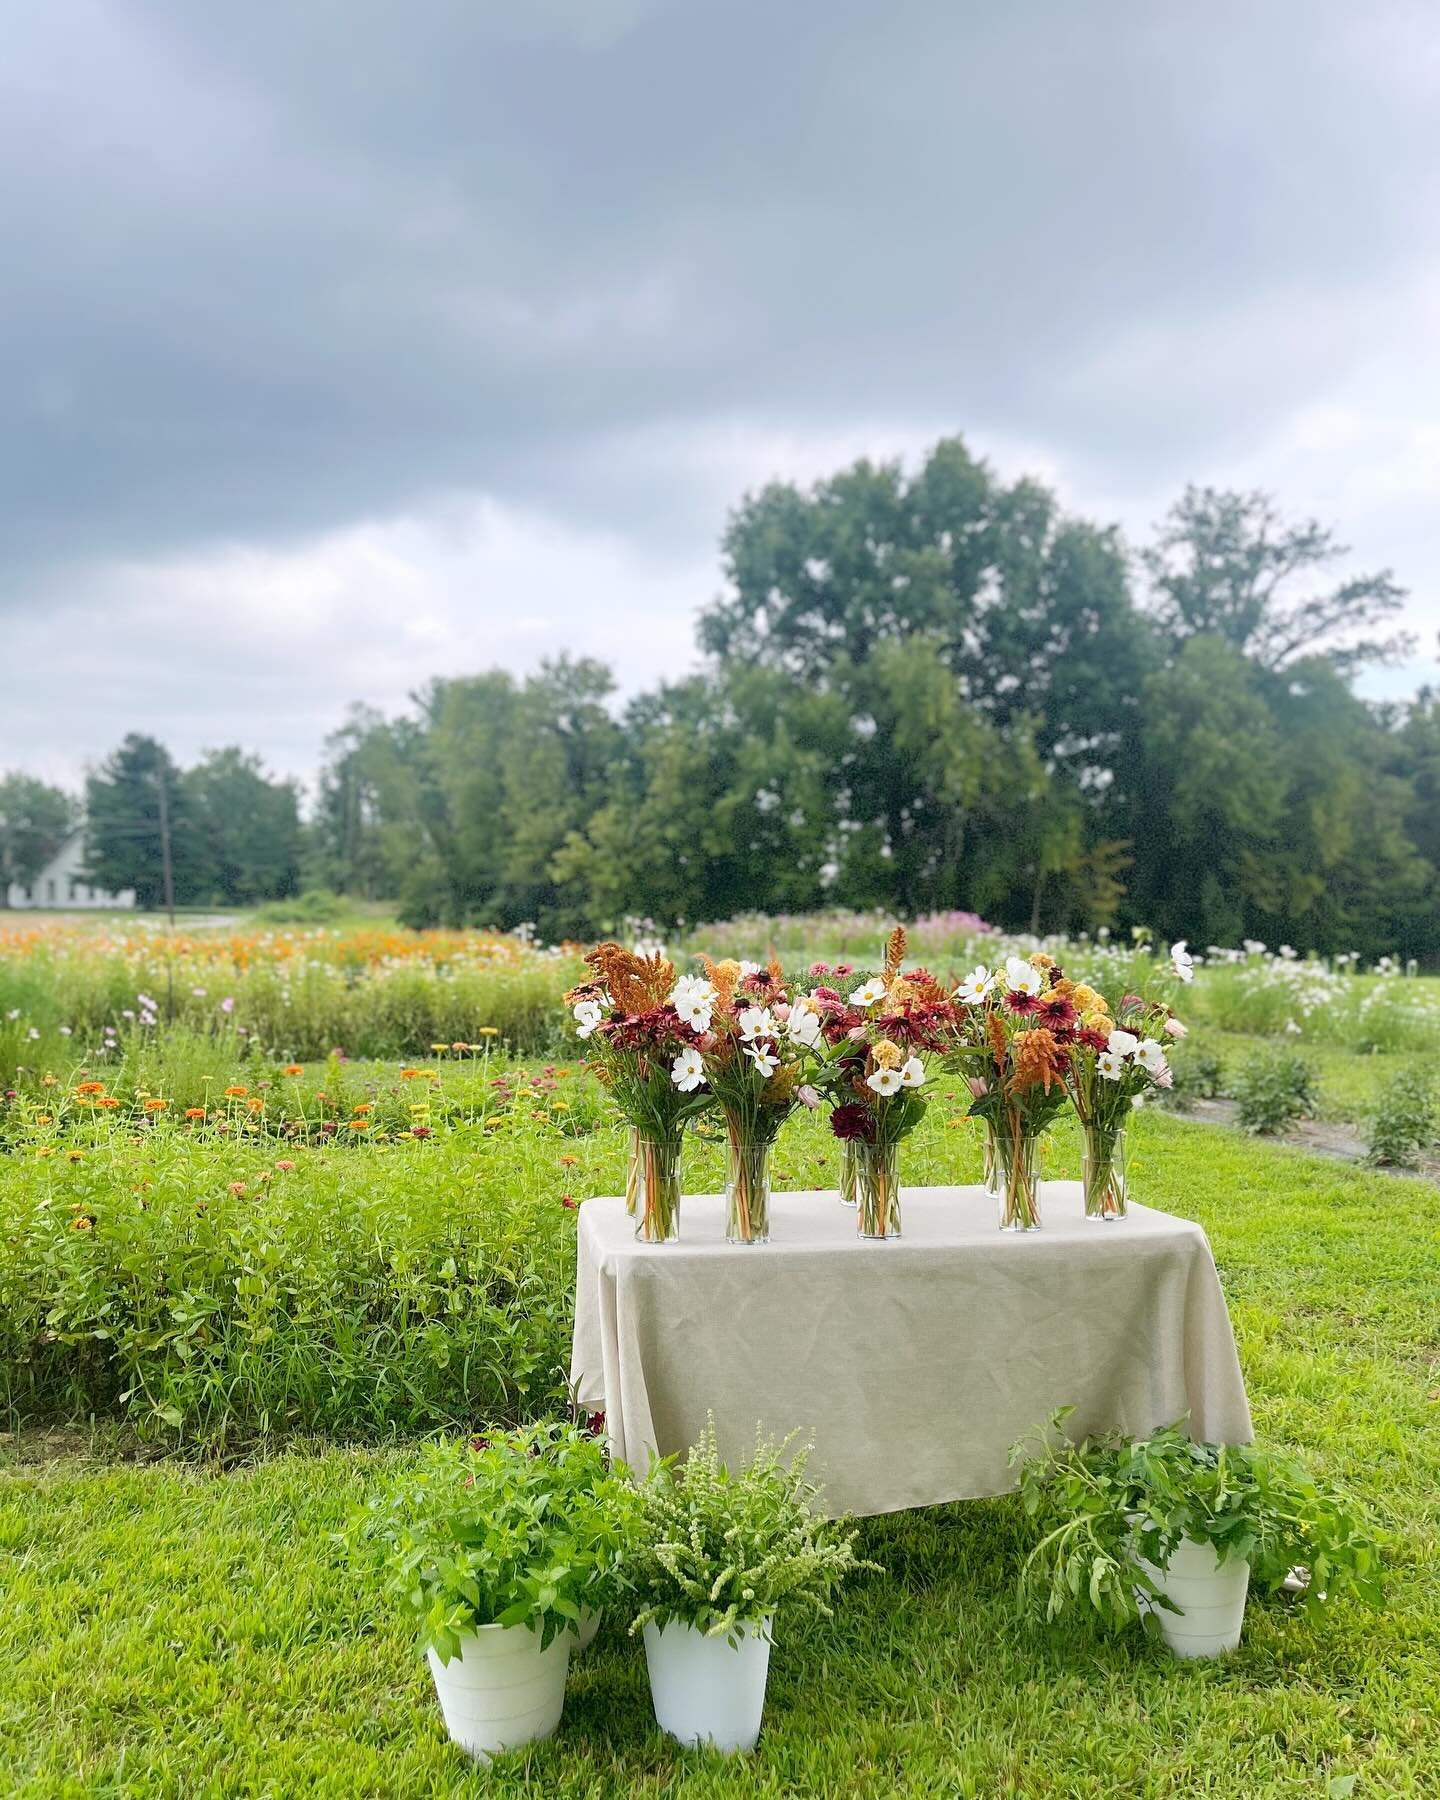 A little housekeeping post!

I have been getting a lot of inquiries for flower picking, small gatherings and photography sessions. Here is an overview of what to expect the next few months at the farm:
-U-Pick: Fingers crossed we can start mid-July. 